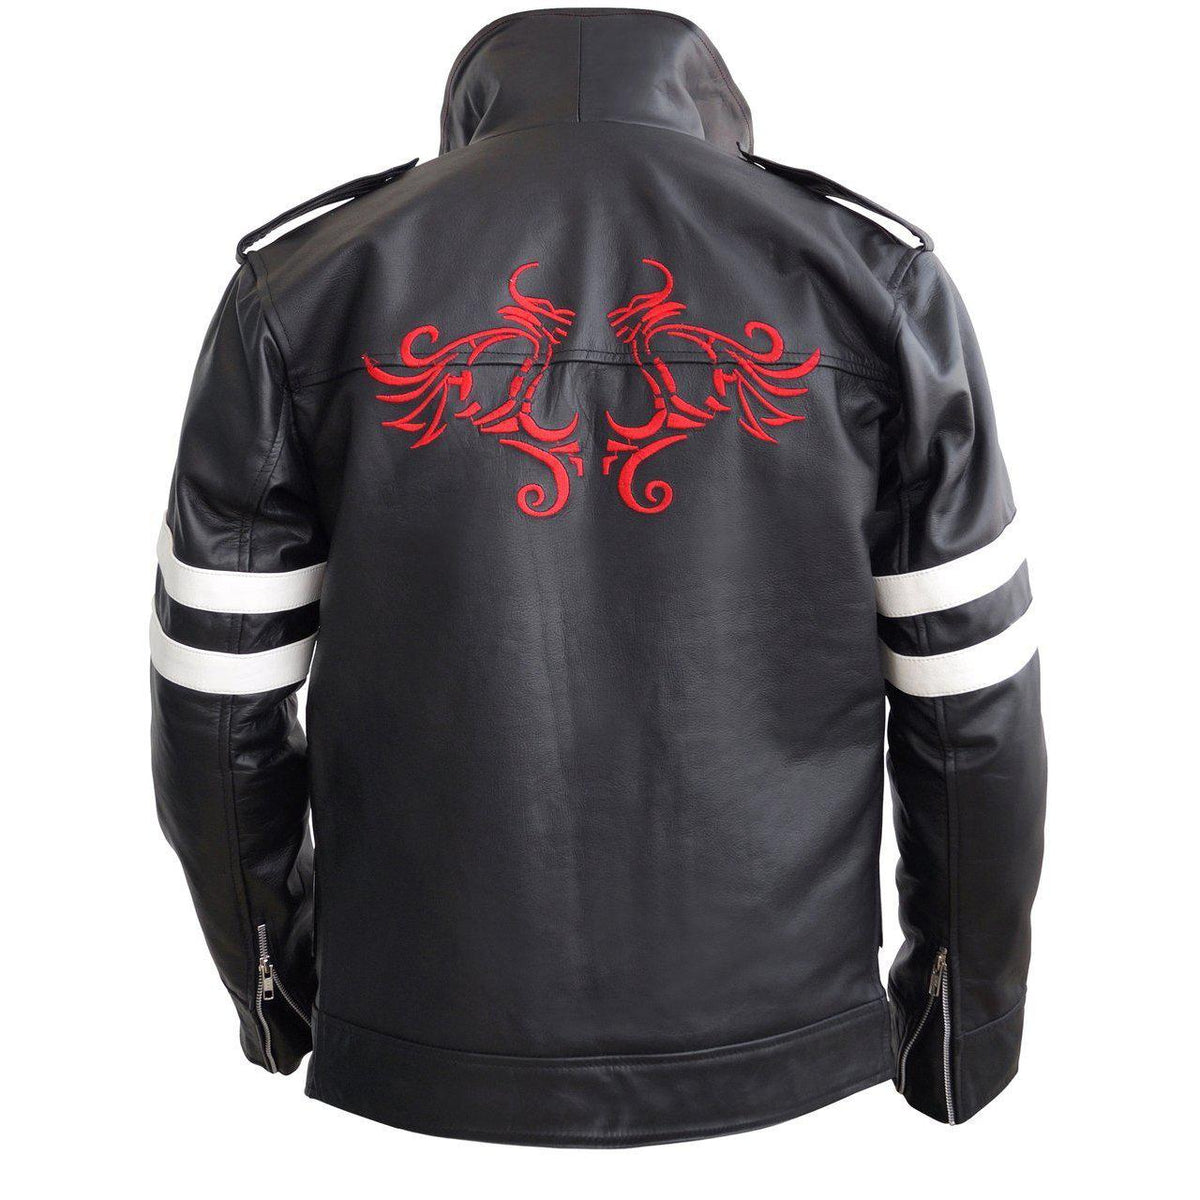 Leather Skin Black Leather Jacket with White Stripes and Dragon Embroi ...